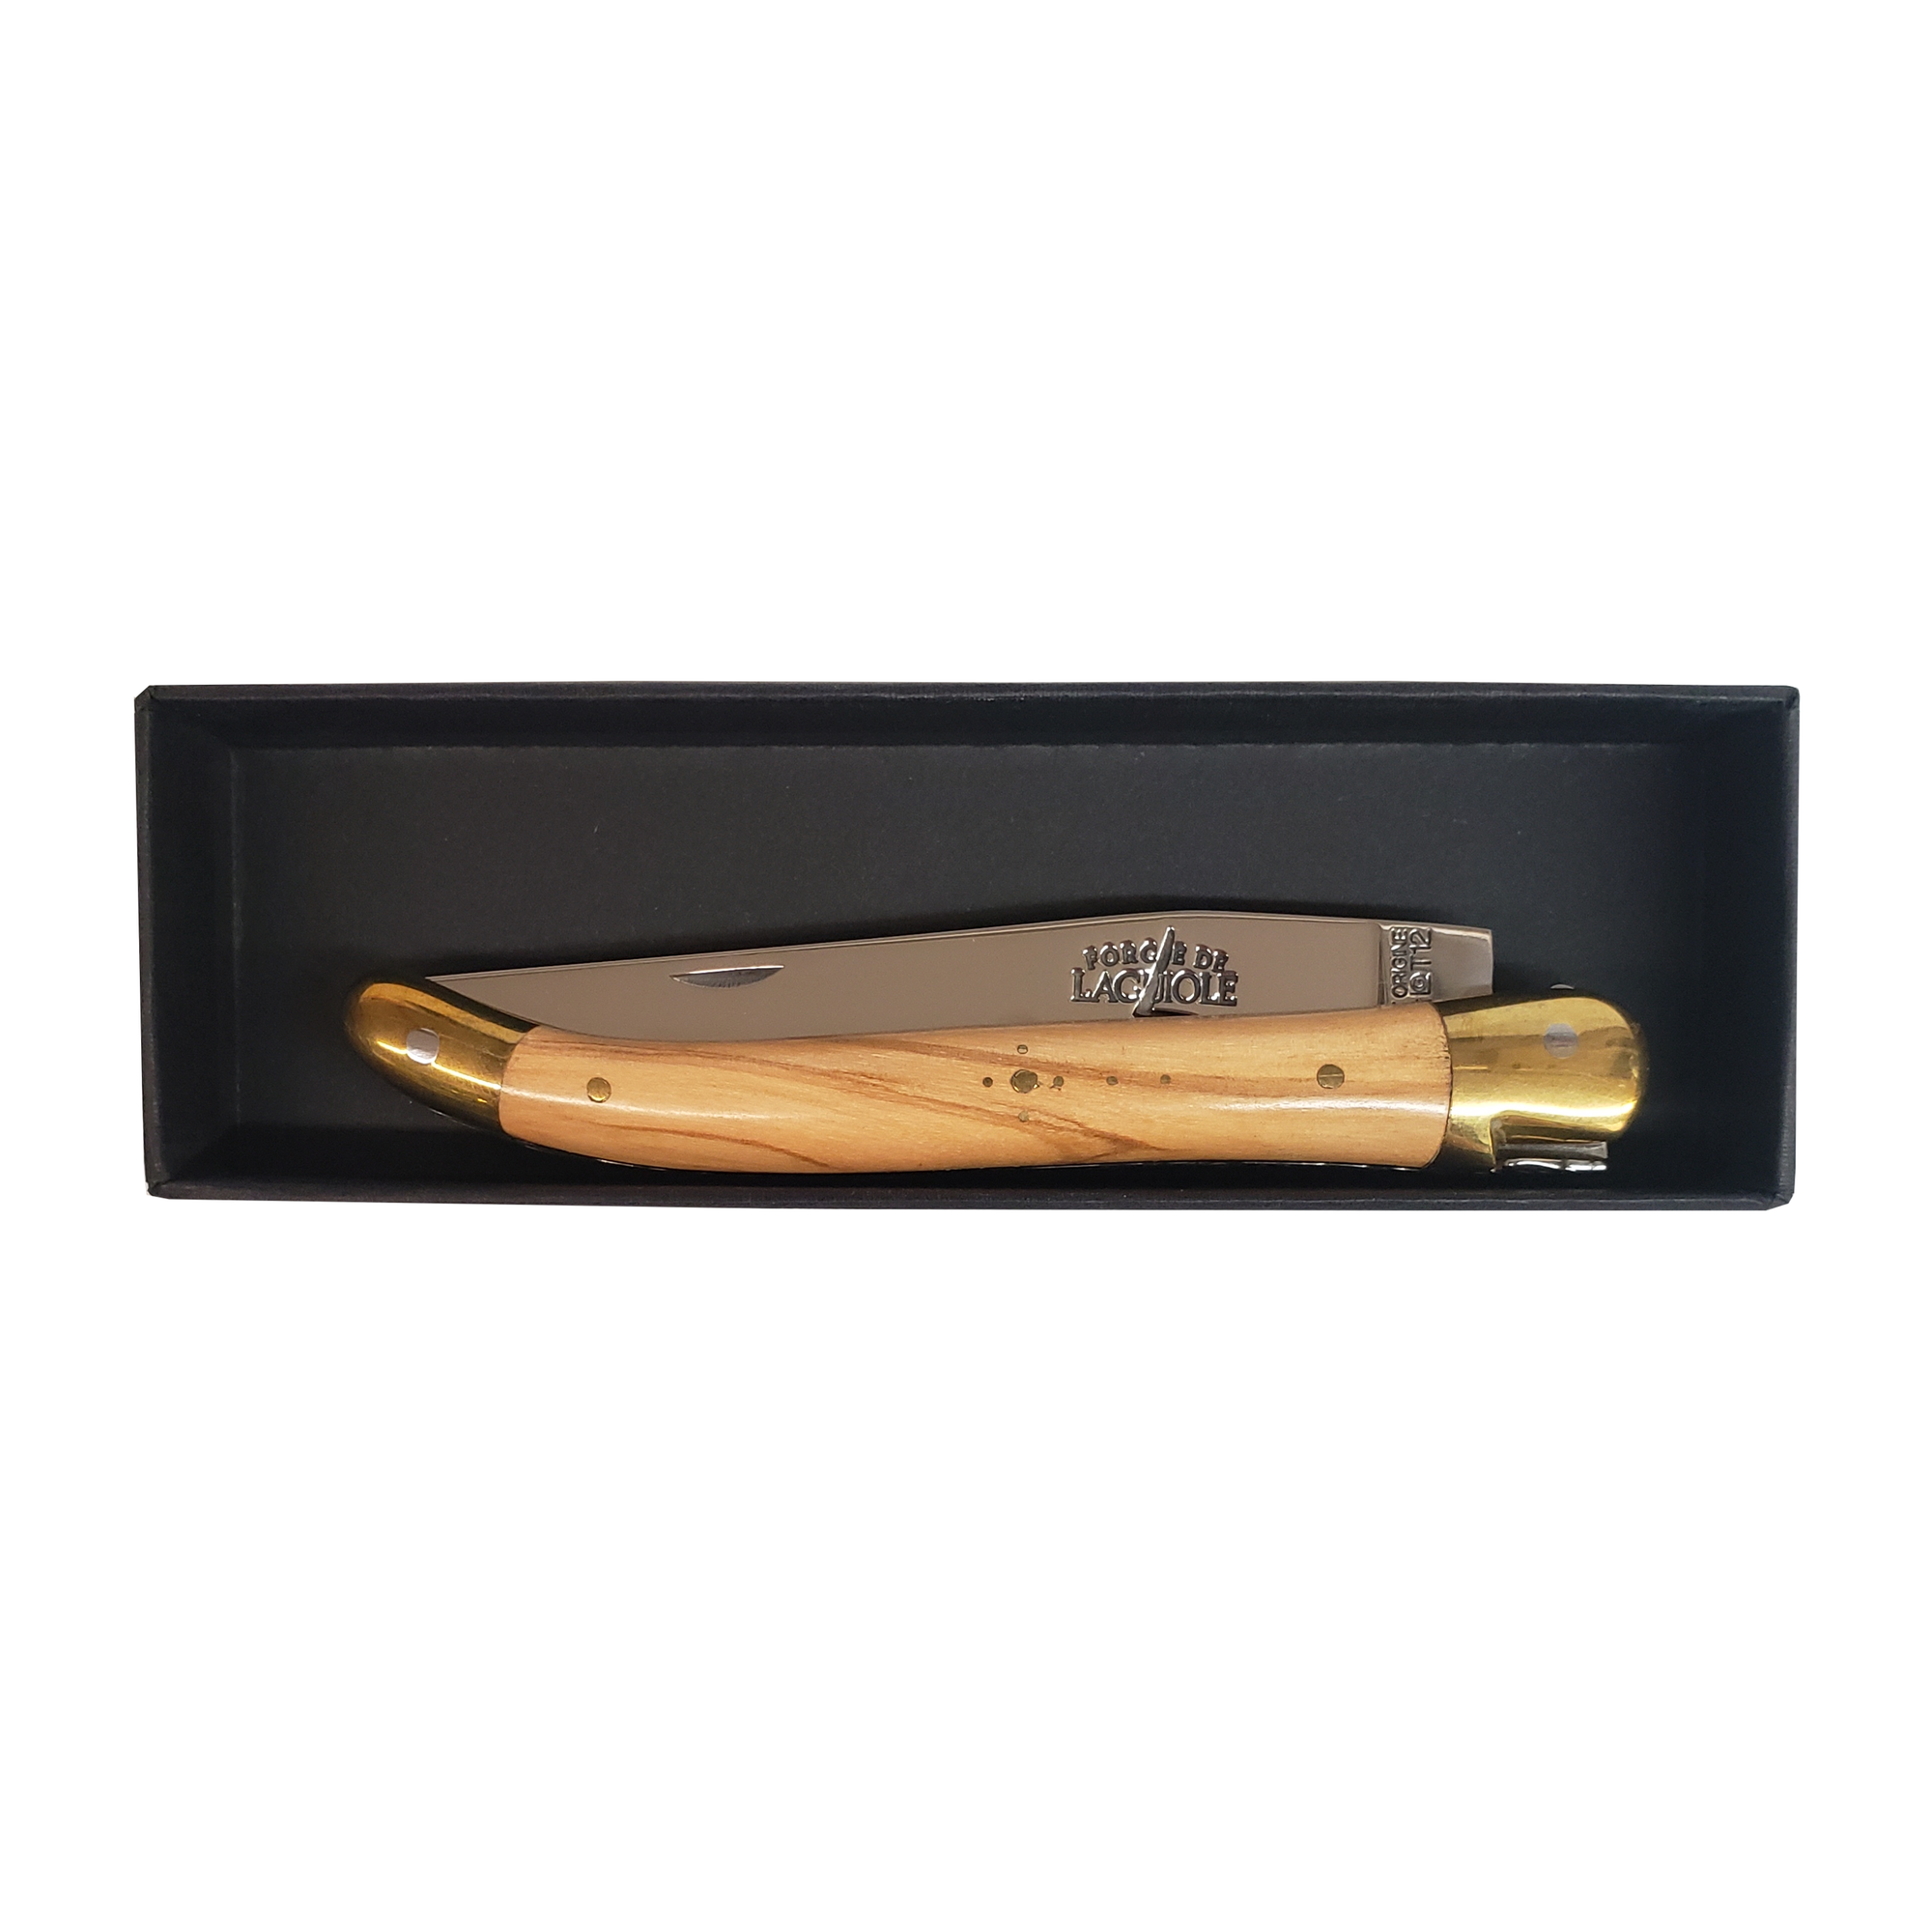 Forge de Laguiole Pocket Knife with an Olivewood Handle